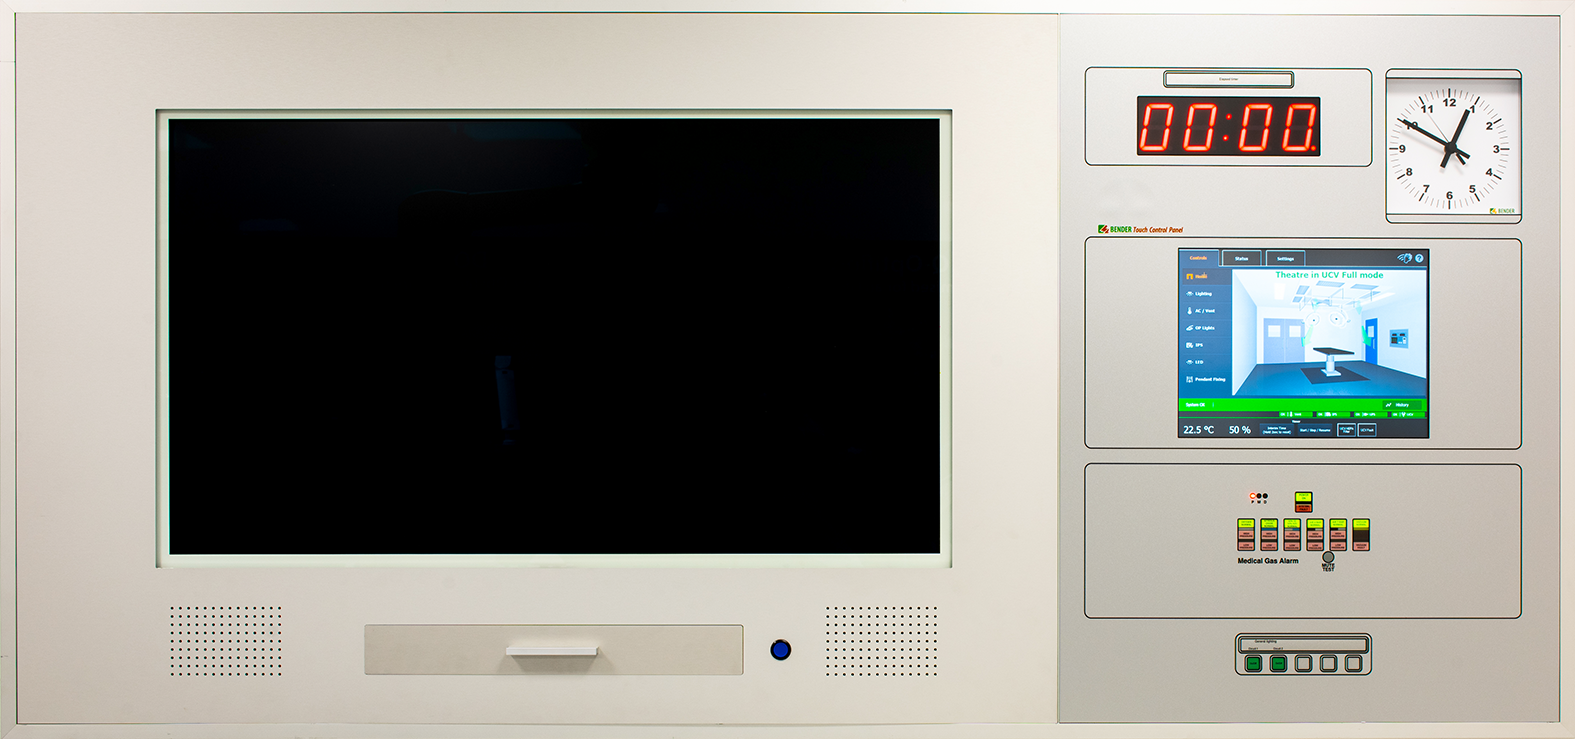 Conventional theatre control panel with PACS